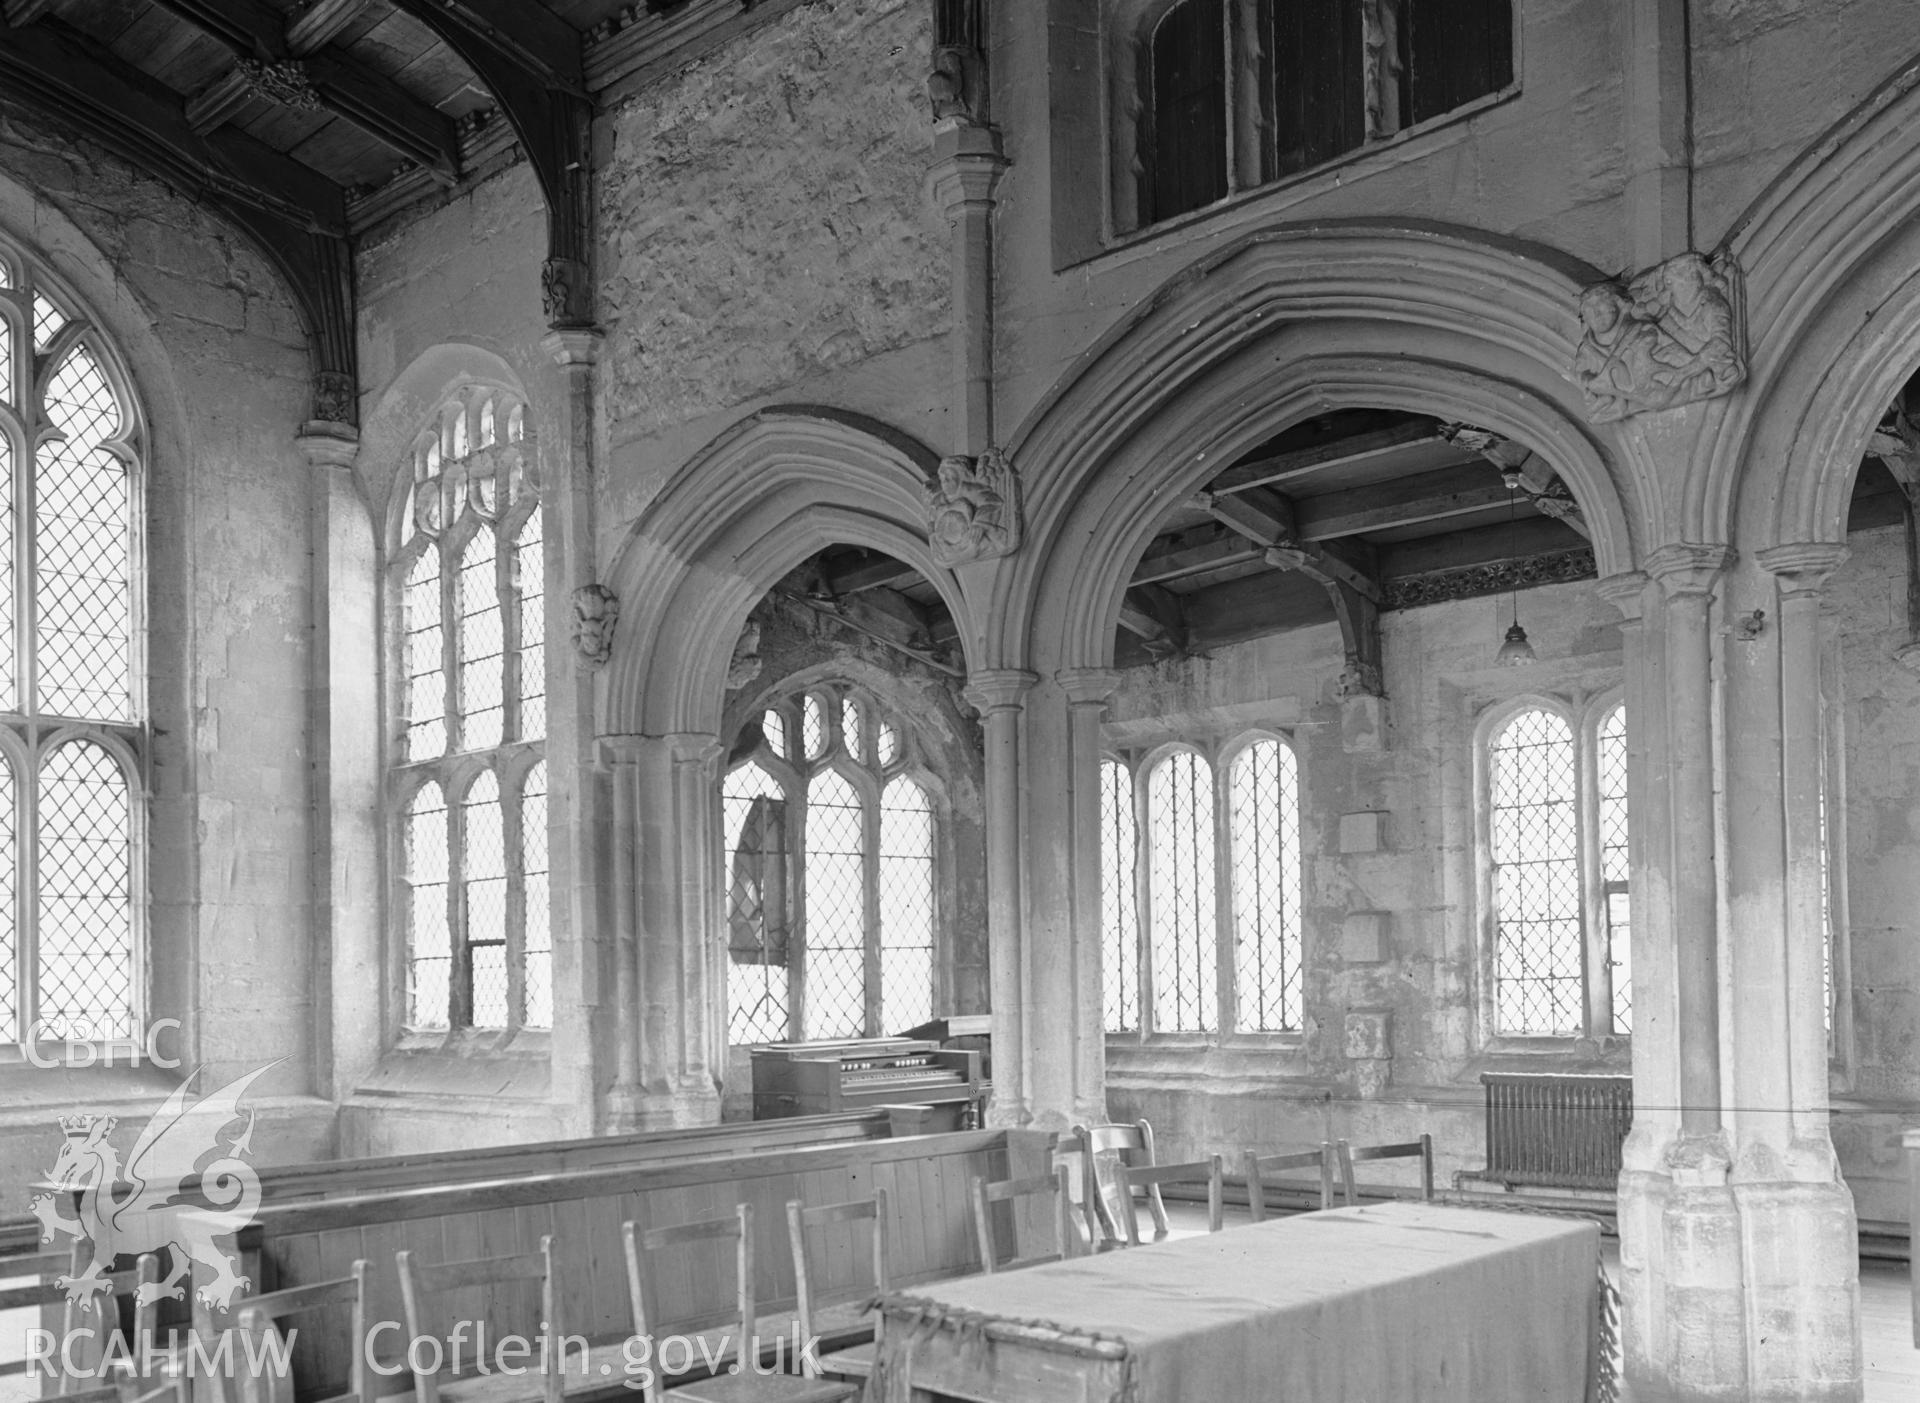 Interior view of the chapel looking north-west